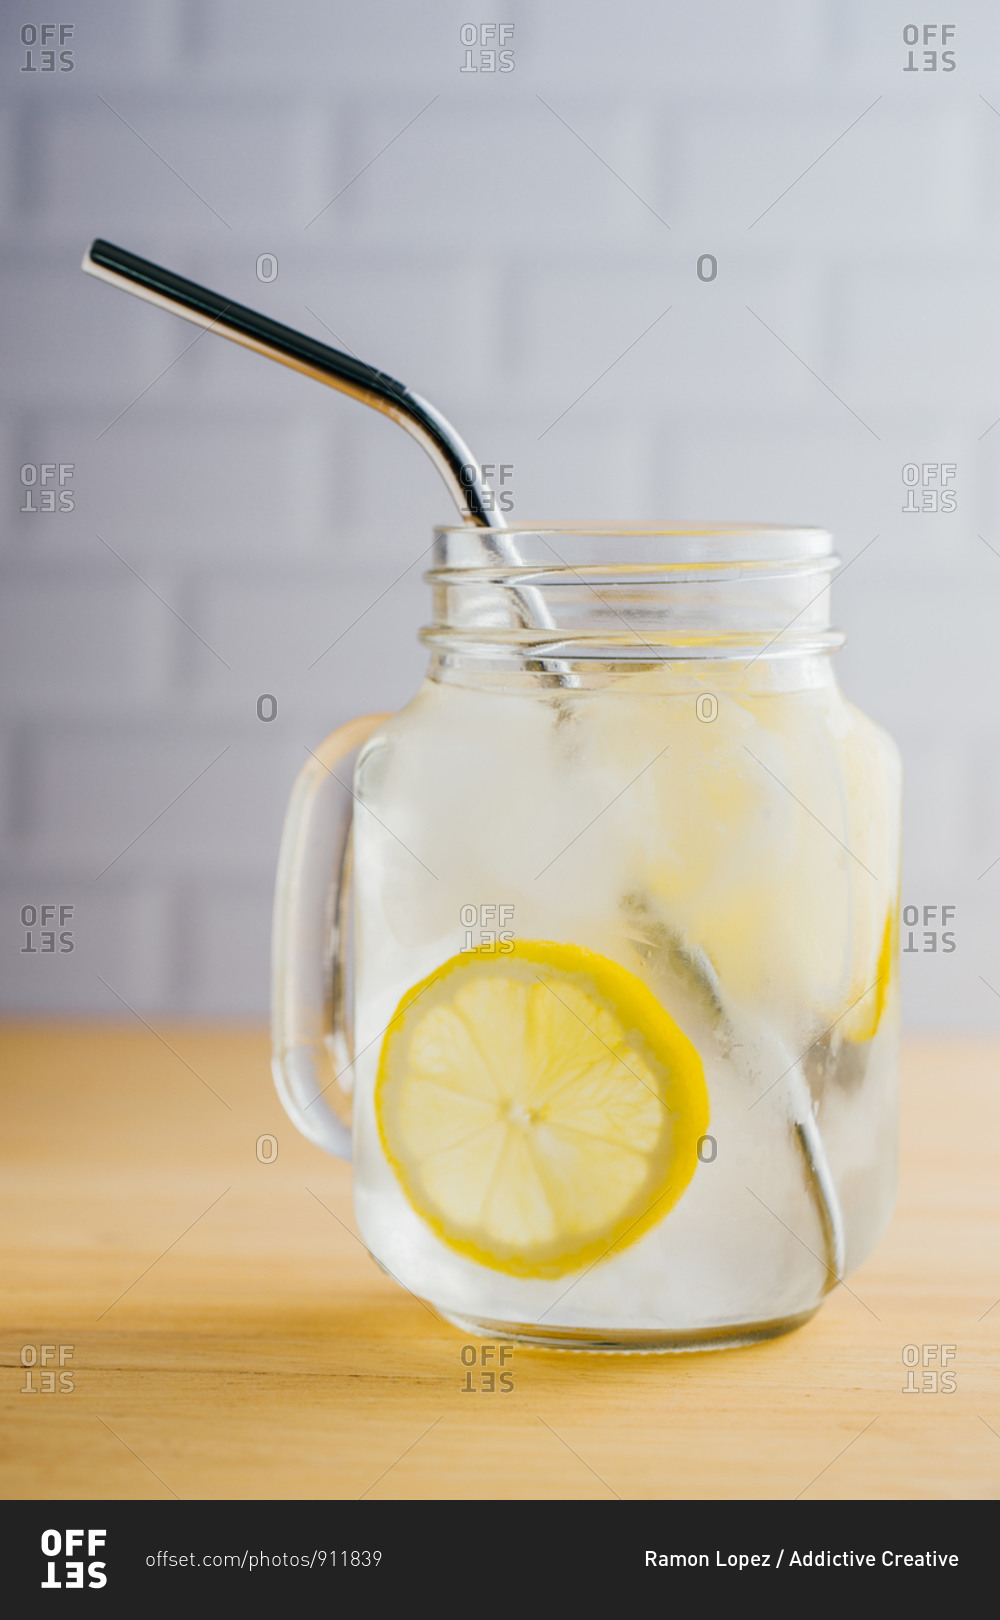 Metallic reusable straw and glass jug with ice and lemon slices on wooden table in kitchen